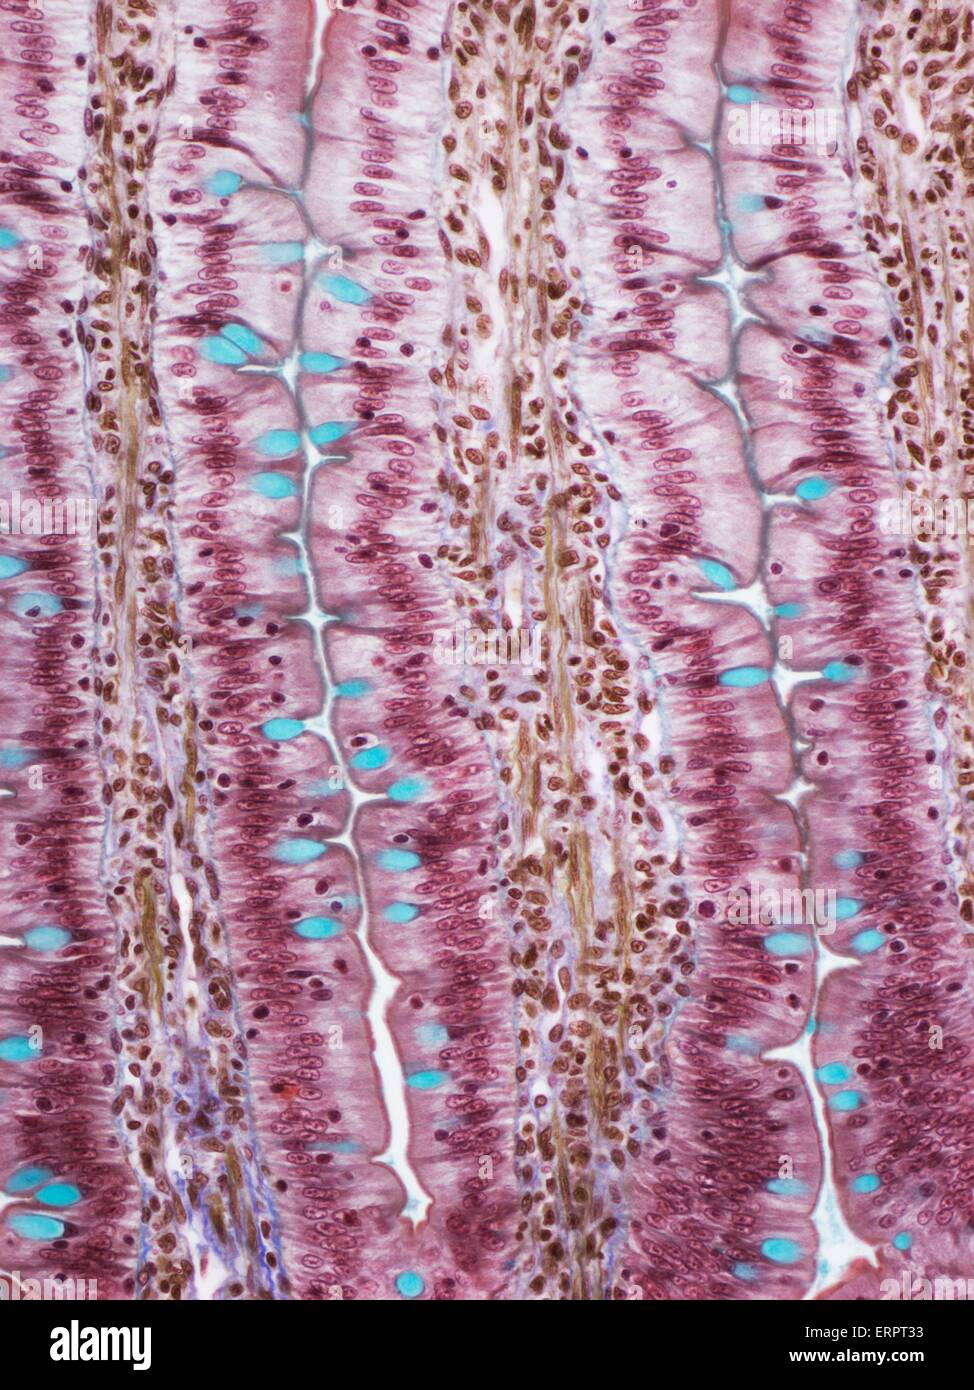 Small intestine. Light micrograph of a section through the finger-like projections (villi) of the duodenum, the uppermost part of the small intestine. These increase the surface area for the absorption of food. Within the columnar epithelium of the outer Stock Photo